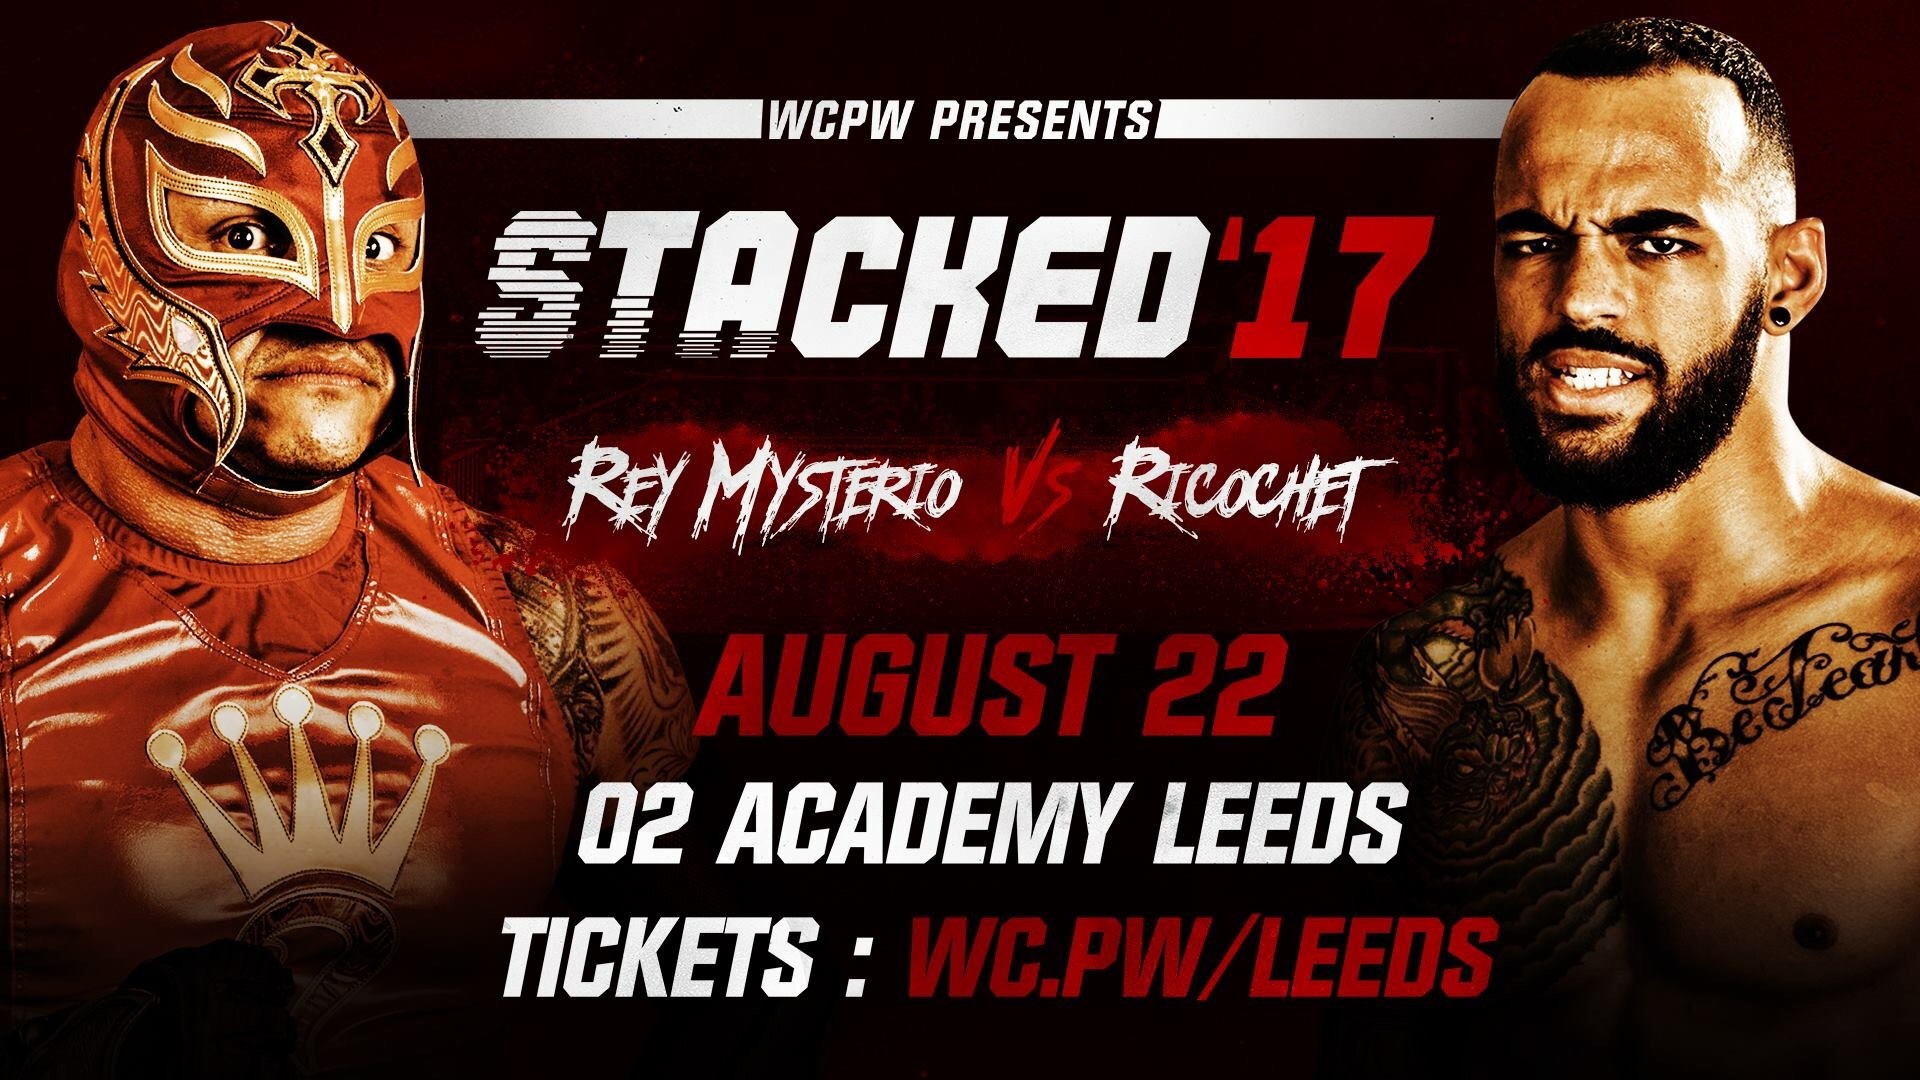 WCPW have announced that Pro Wrestling World Cup Qualifiers, Rey Mysterio will face Ricochet in singles action at Stacked 2017 plus The Briscoe Brothers,